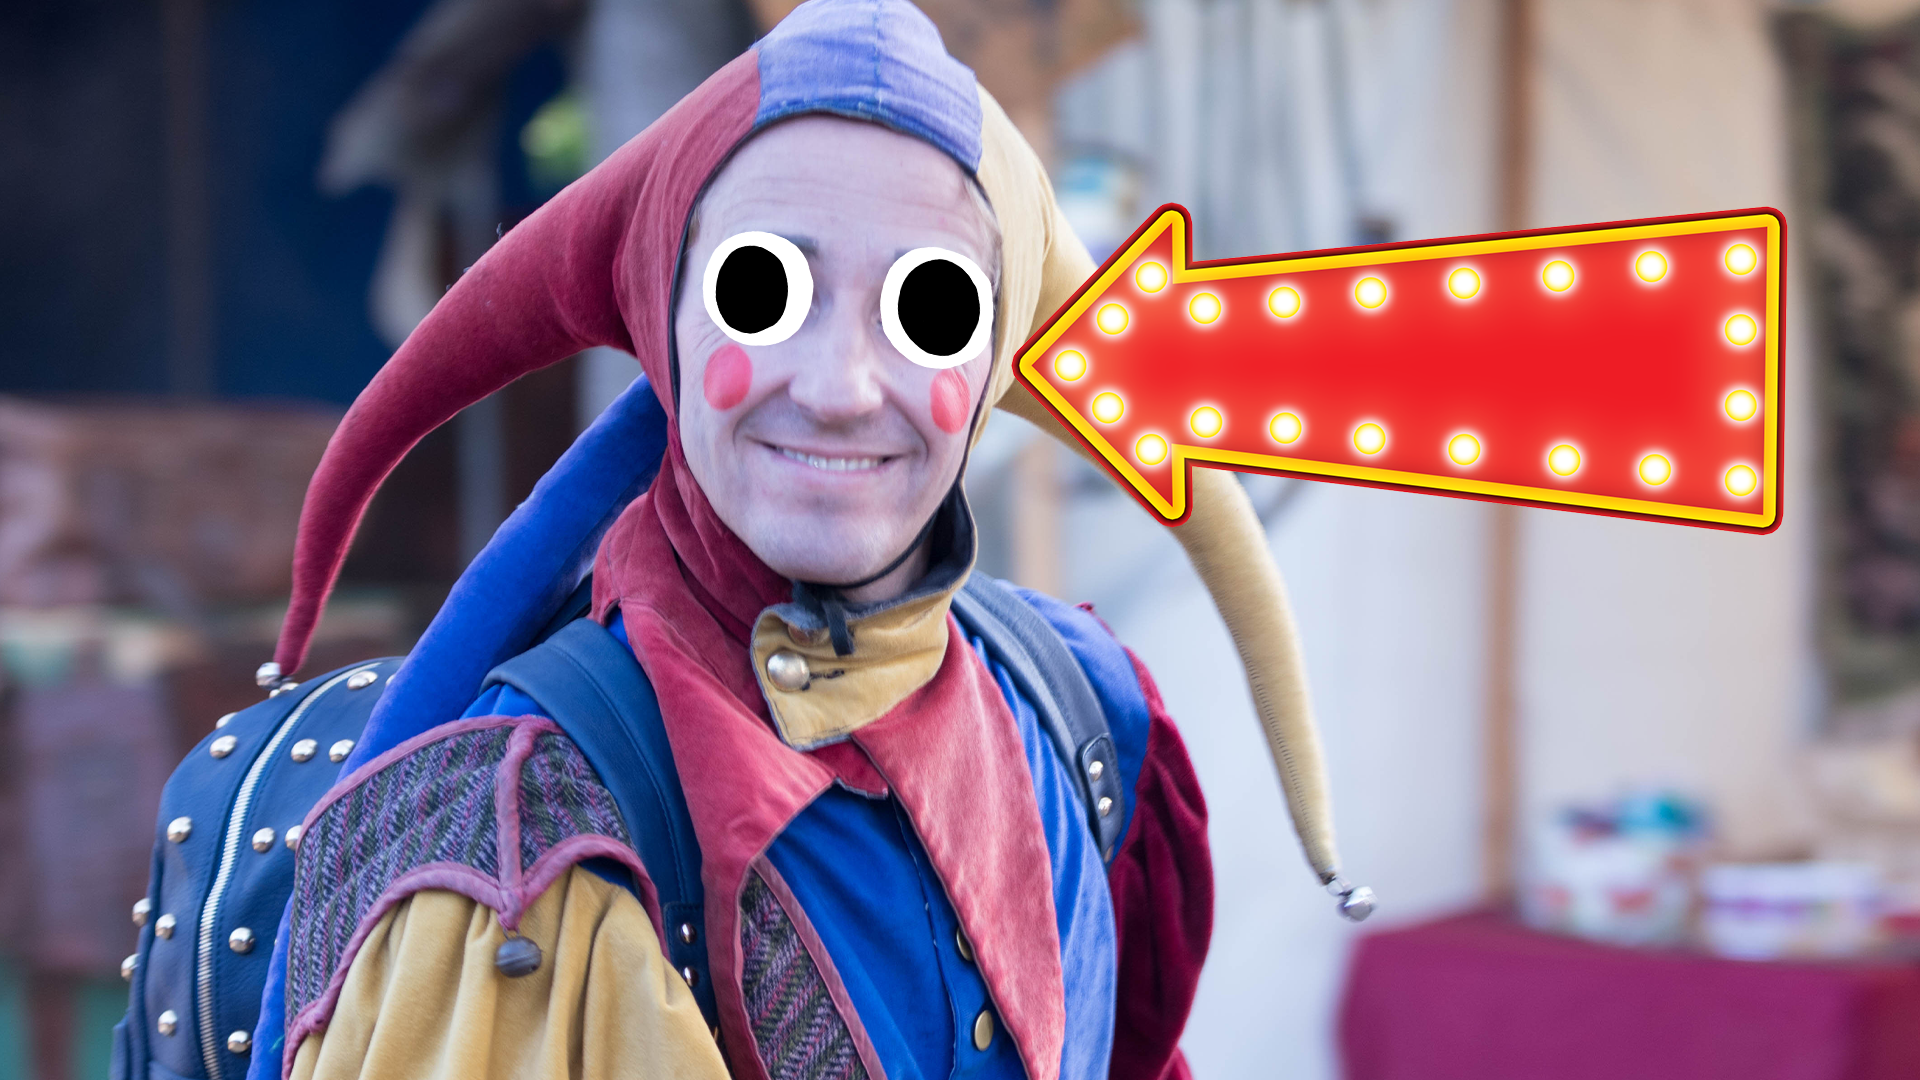 Man dressed as a jester